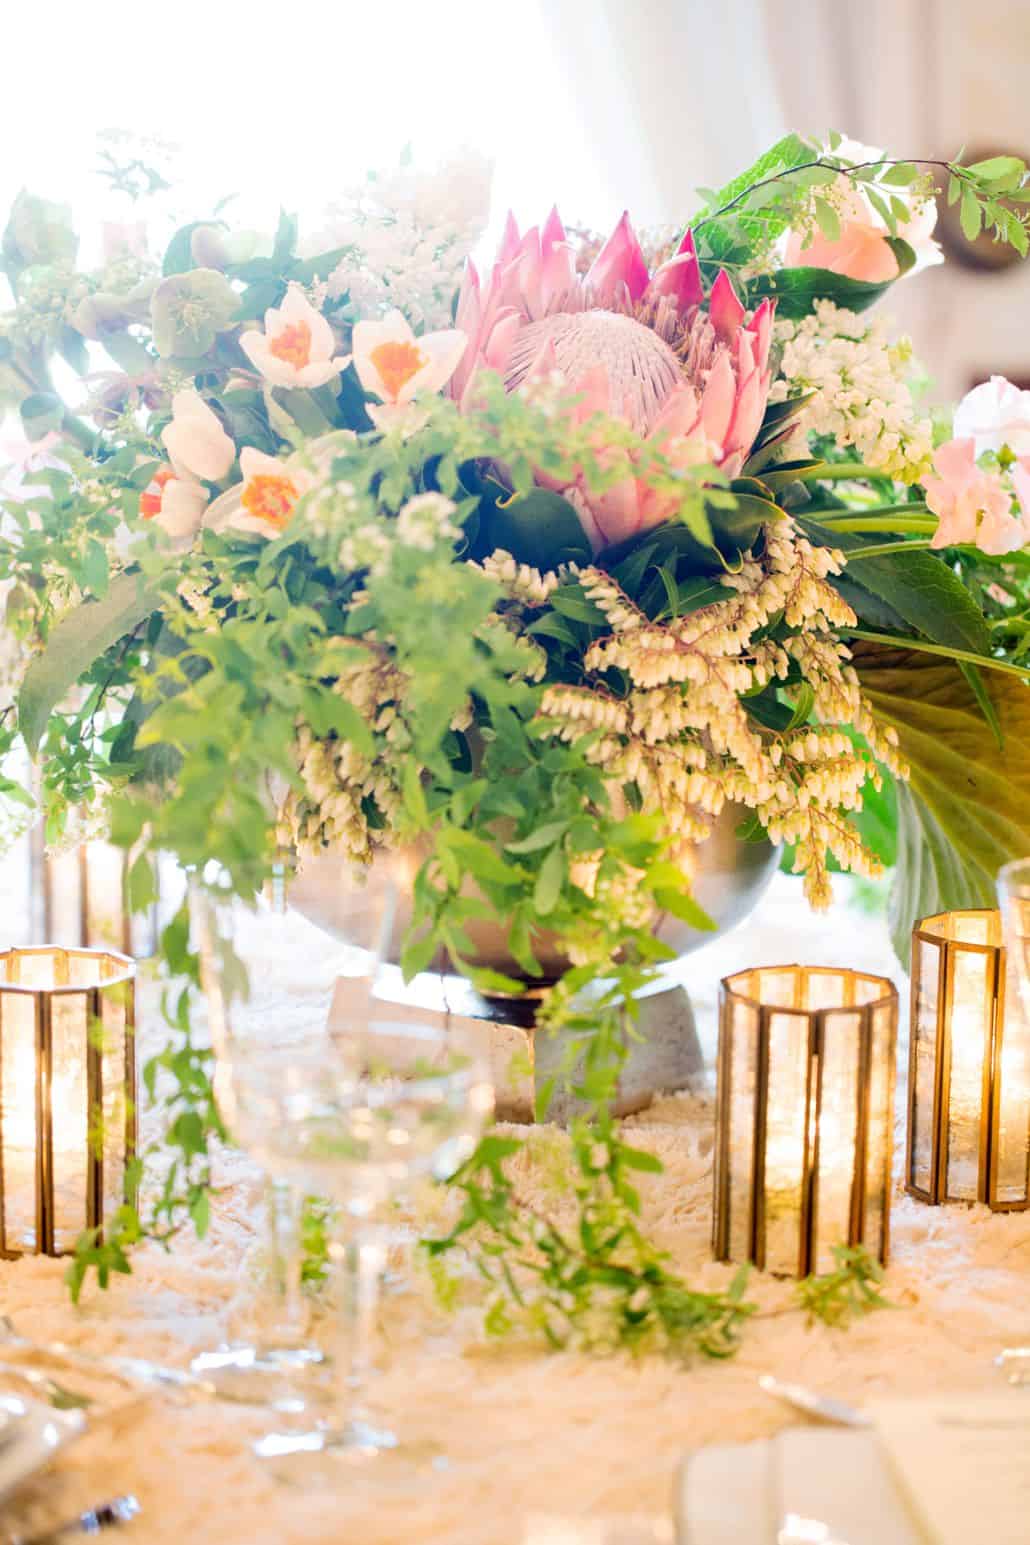 wedding table centerpiece in large silver urn, king protea flowers and hanging leaves, gold candle holders, white lace tablecloth, Viburnum florist, Nassau Inn, Princeton, NJ wedding photographer.